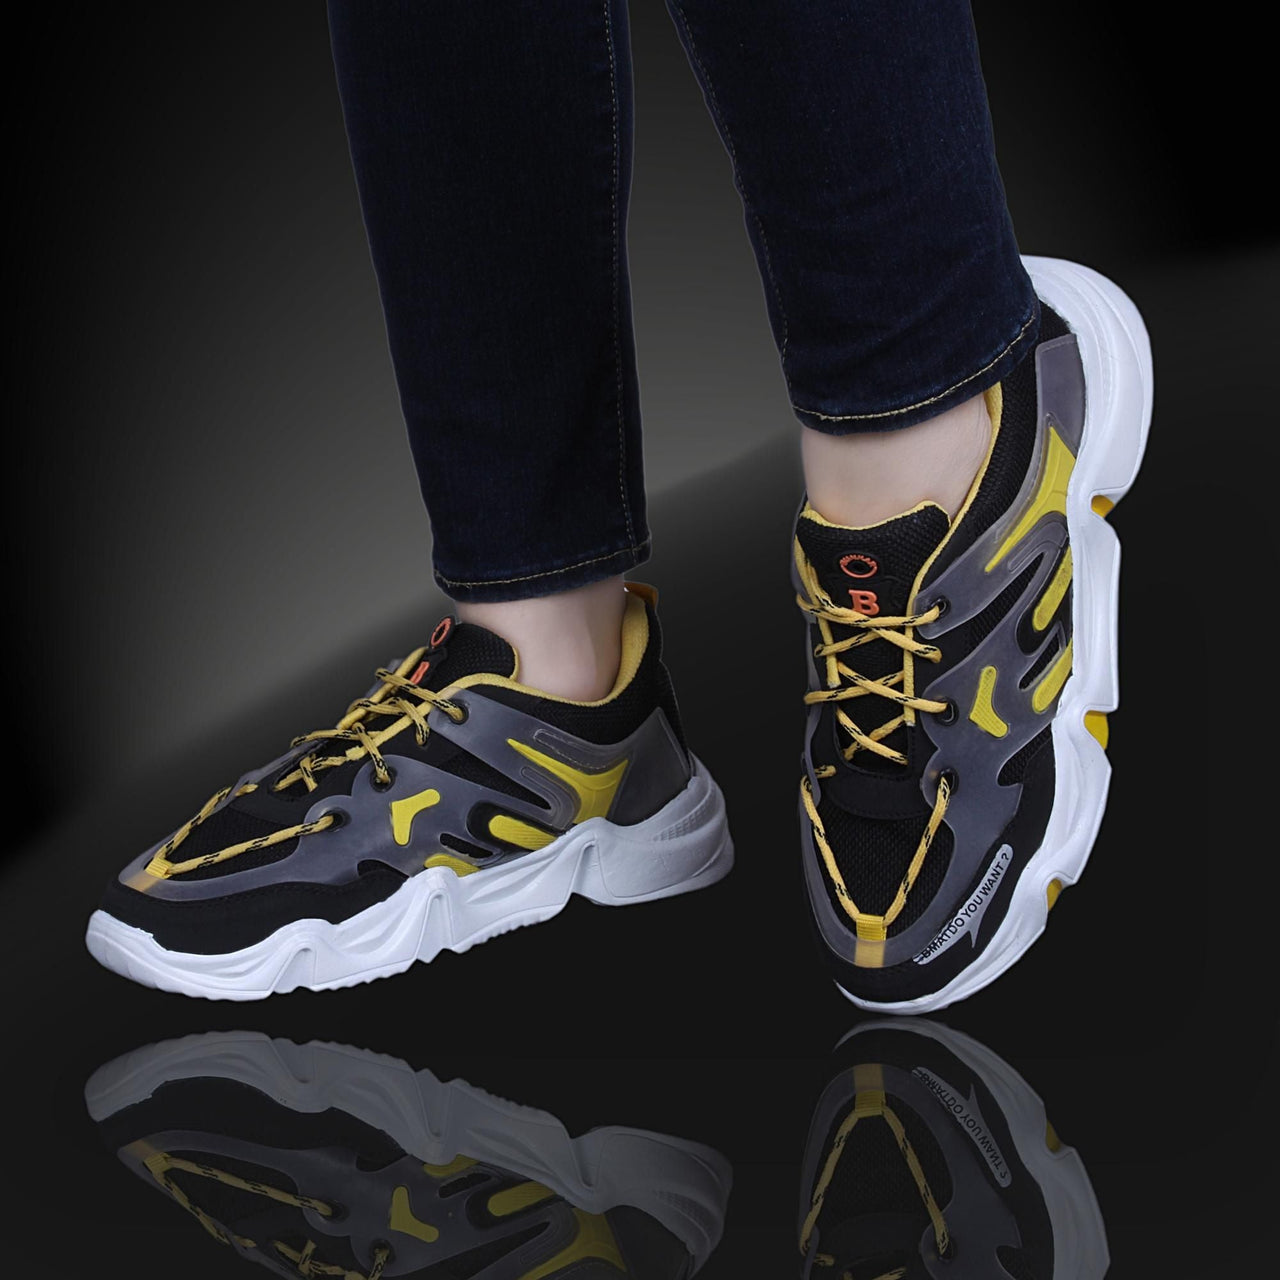 Cool Yellow & Grey Casual Sports Shoes for Men